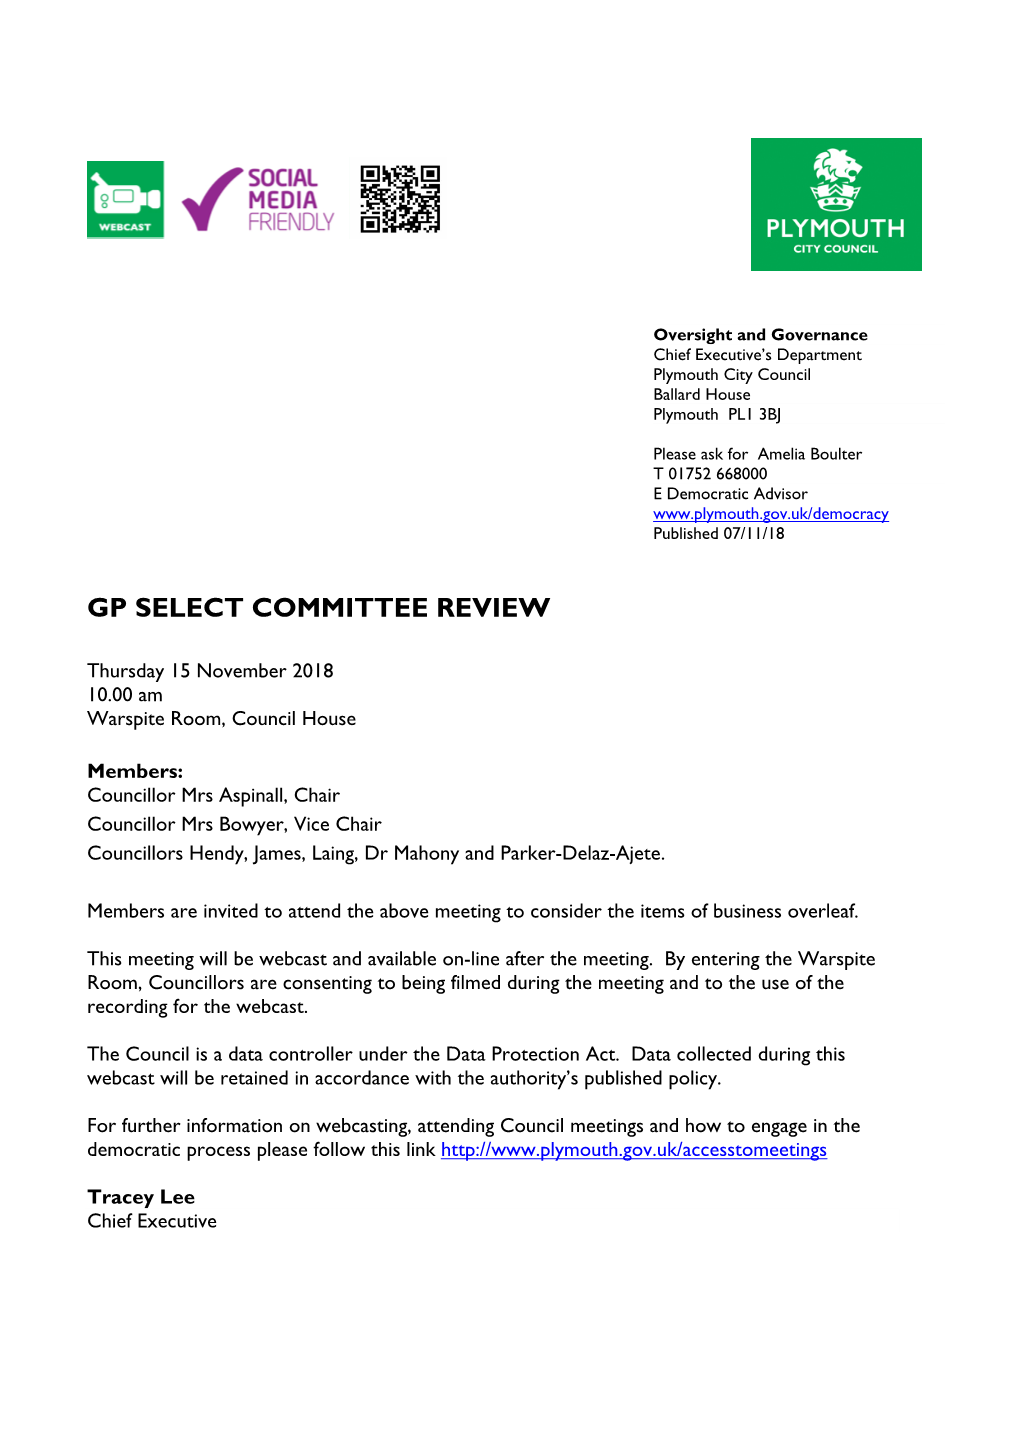 (Public Pack)Agenda Document for Select Committee Review, 15/11